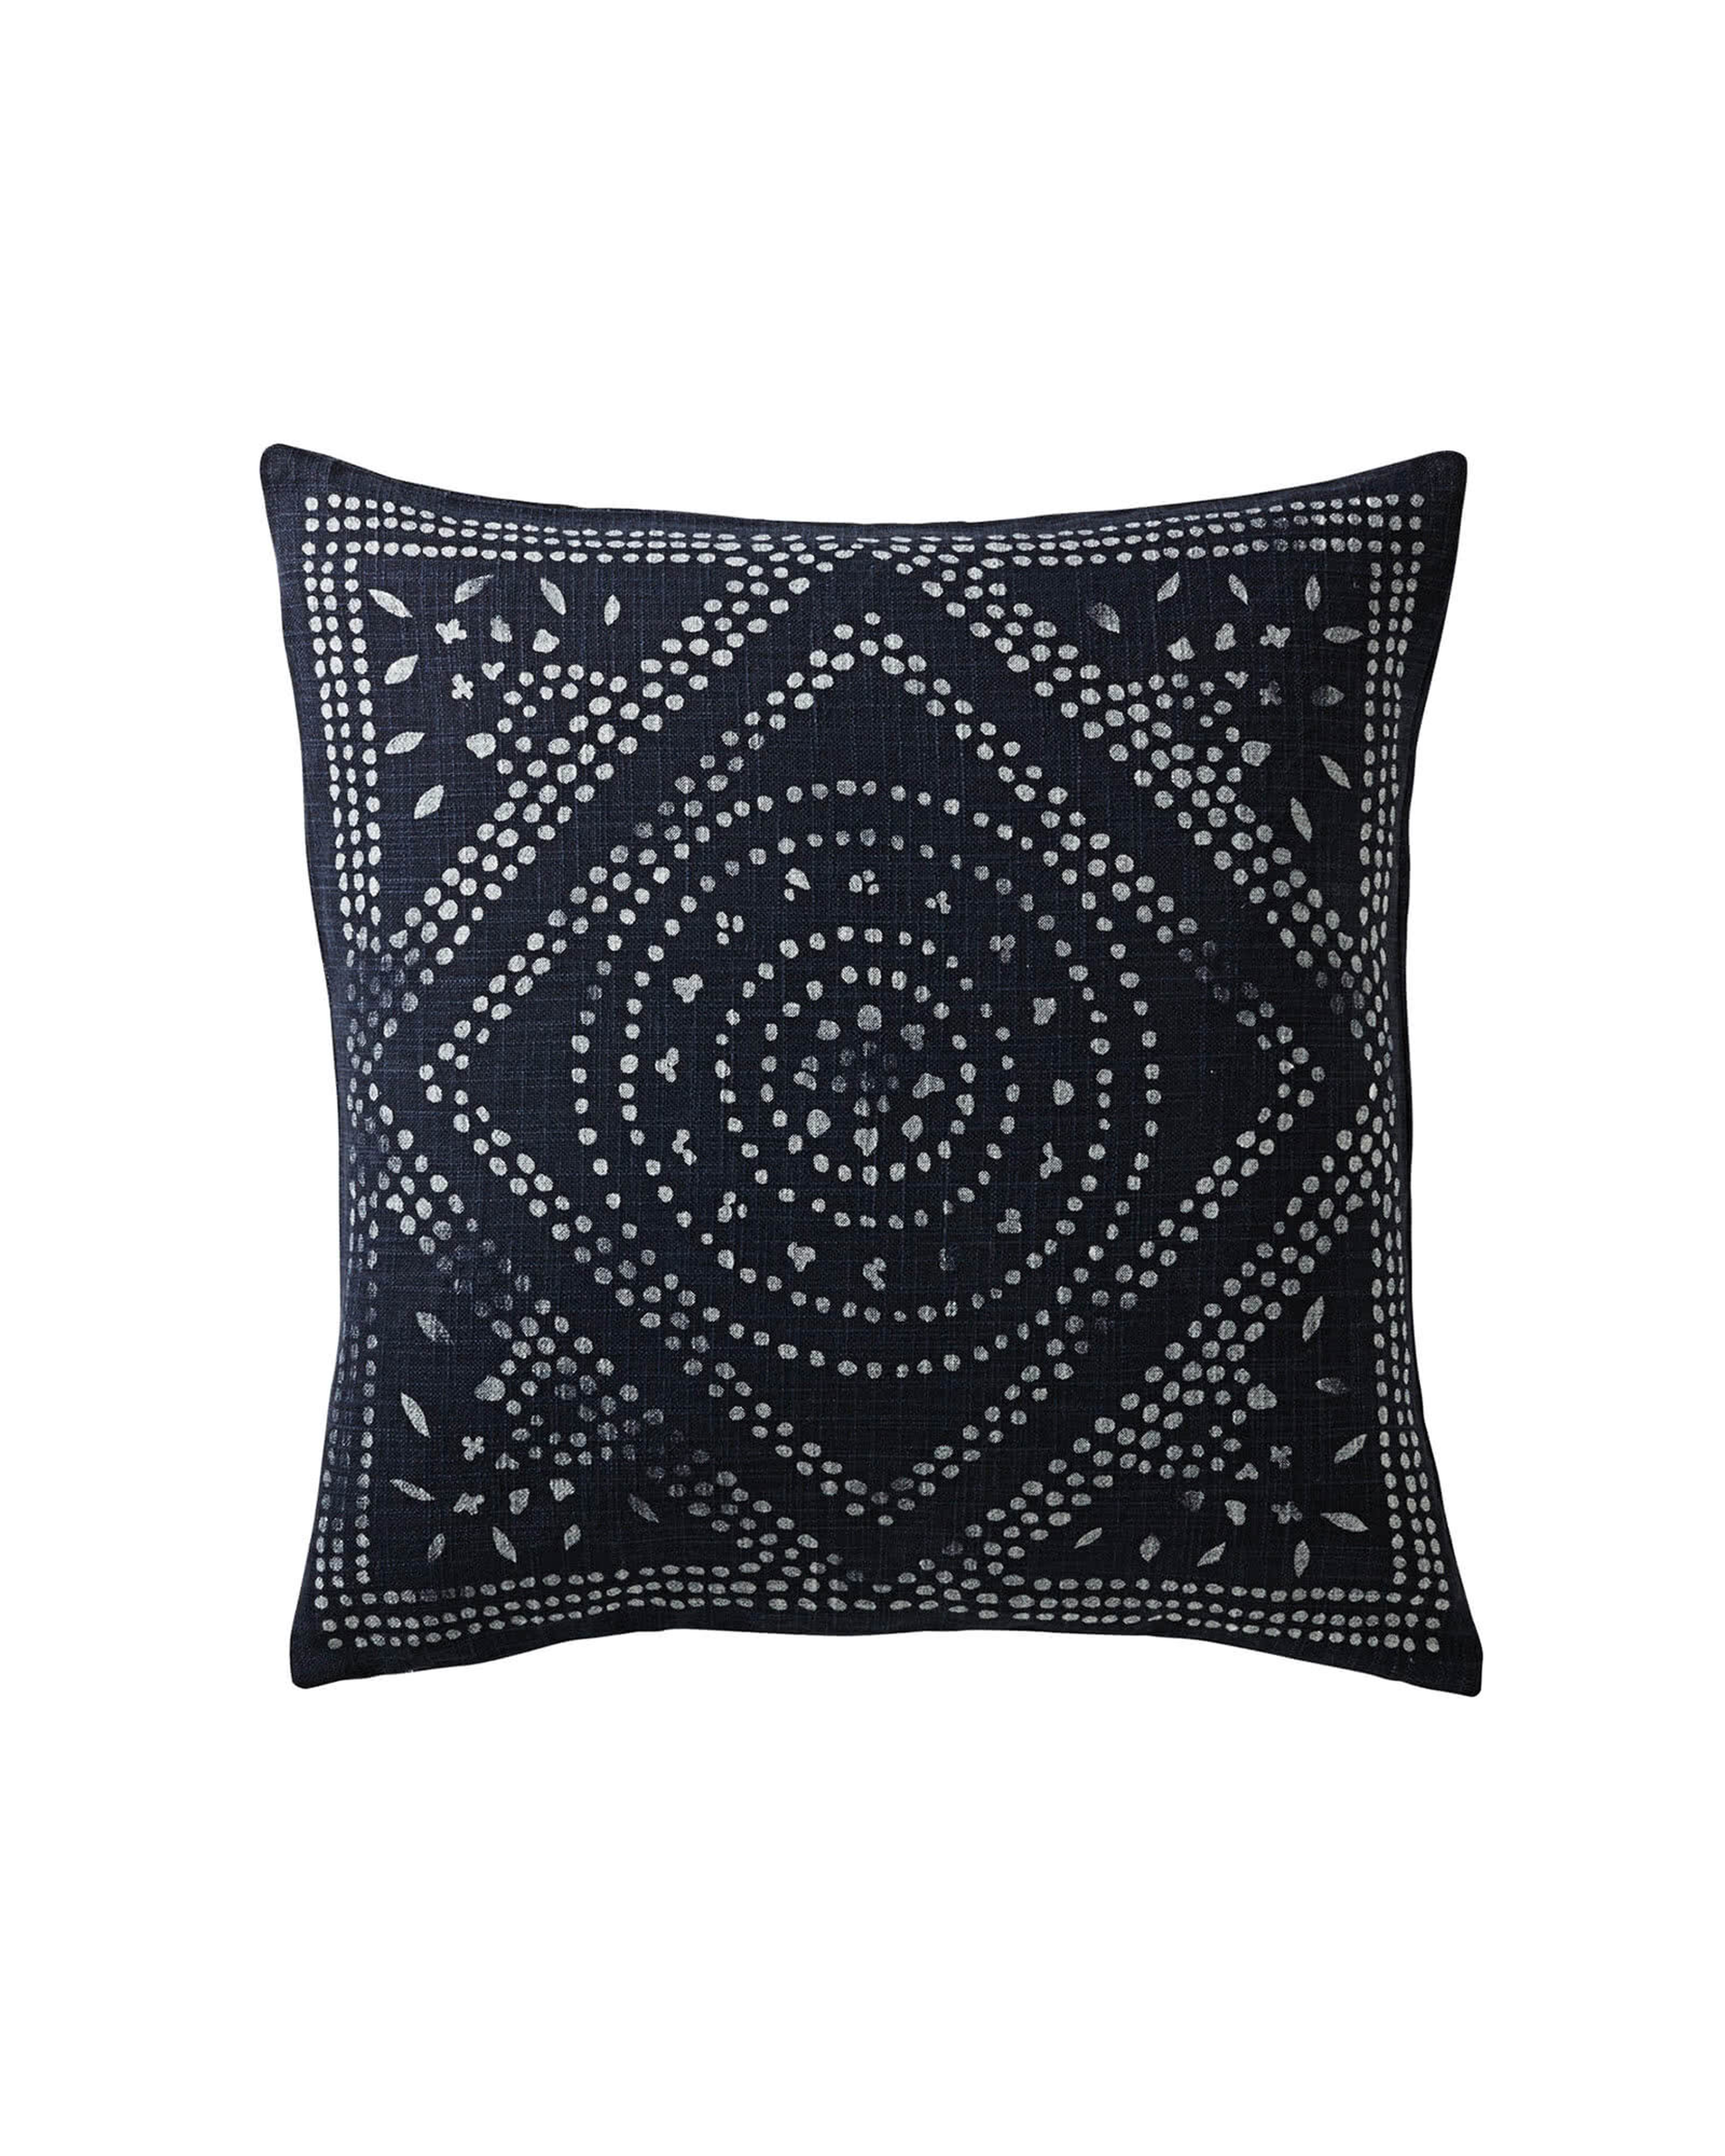 Camille Diamond Medallion Pillow Cover - Serena and Lily